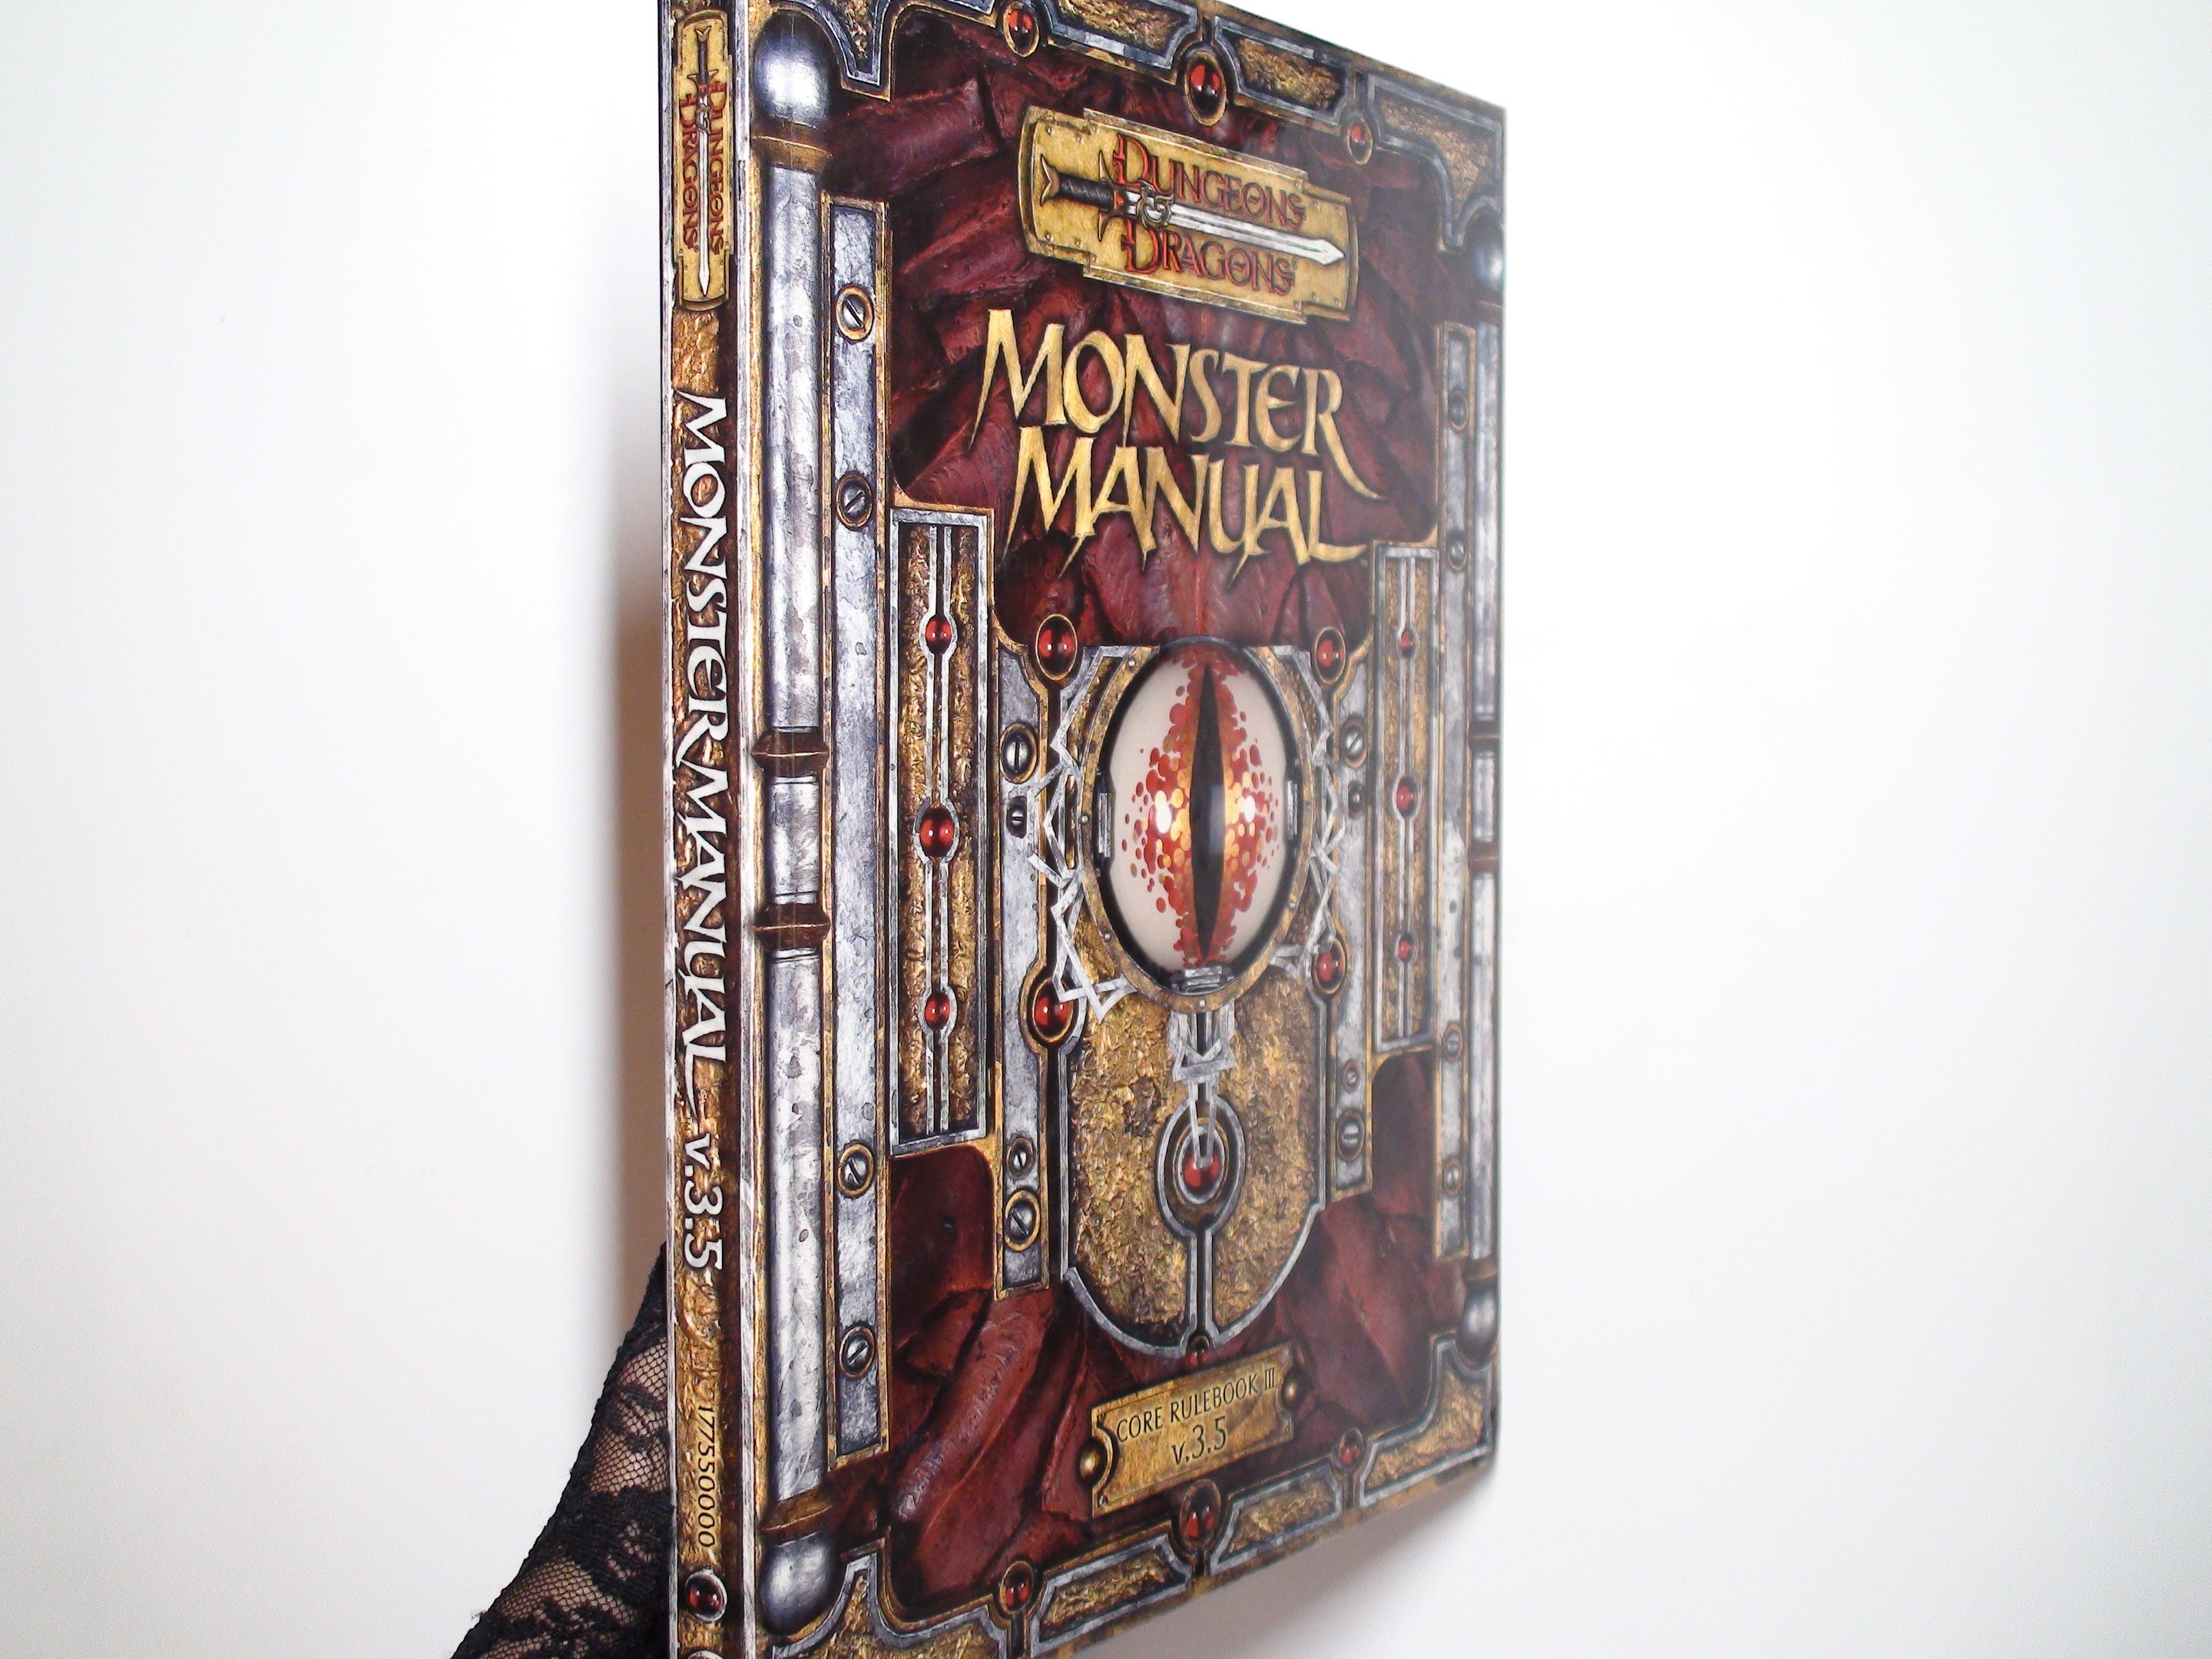 Monster Manual, Core Rulebook III, D&D 3.5, 1st Ed, 1st Printing, 2003